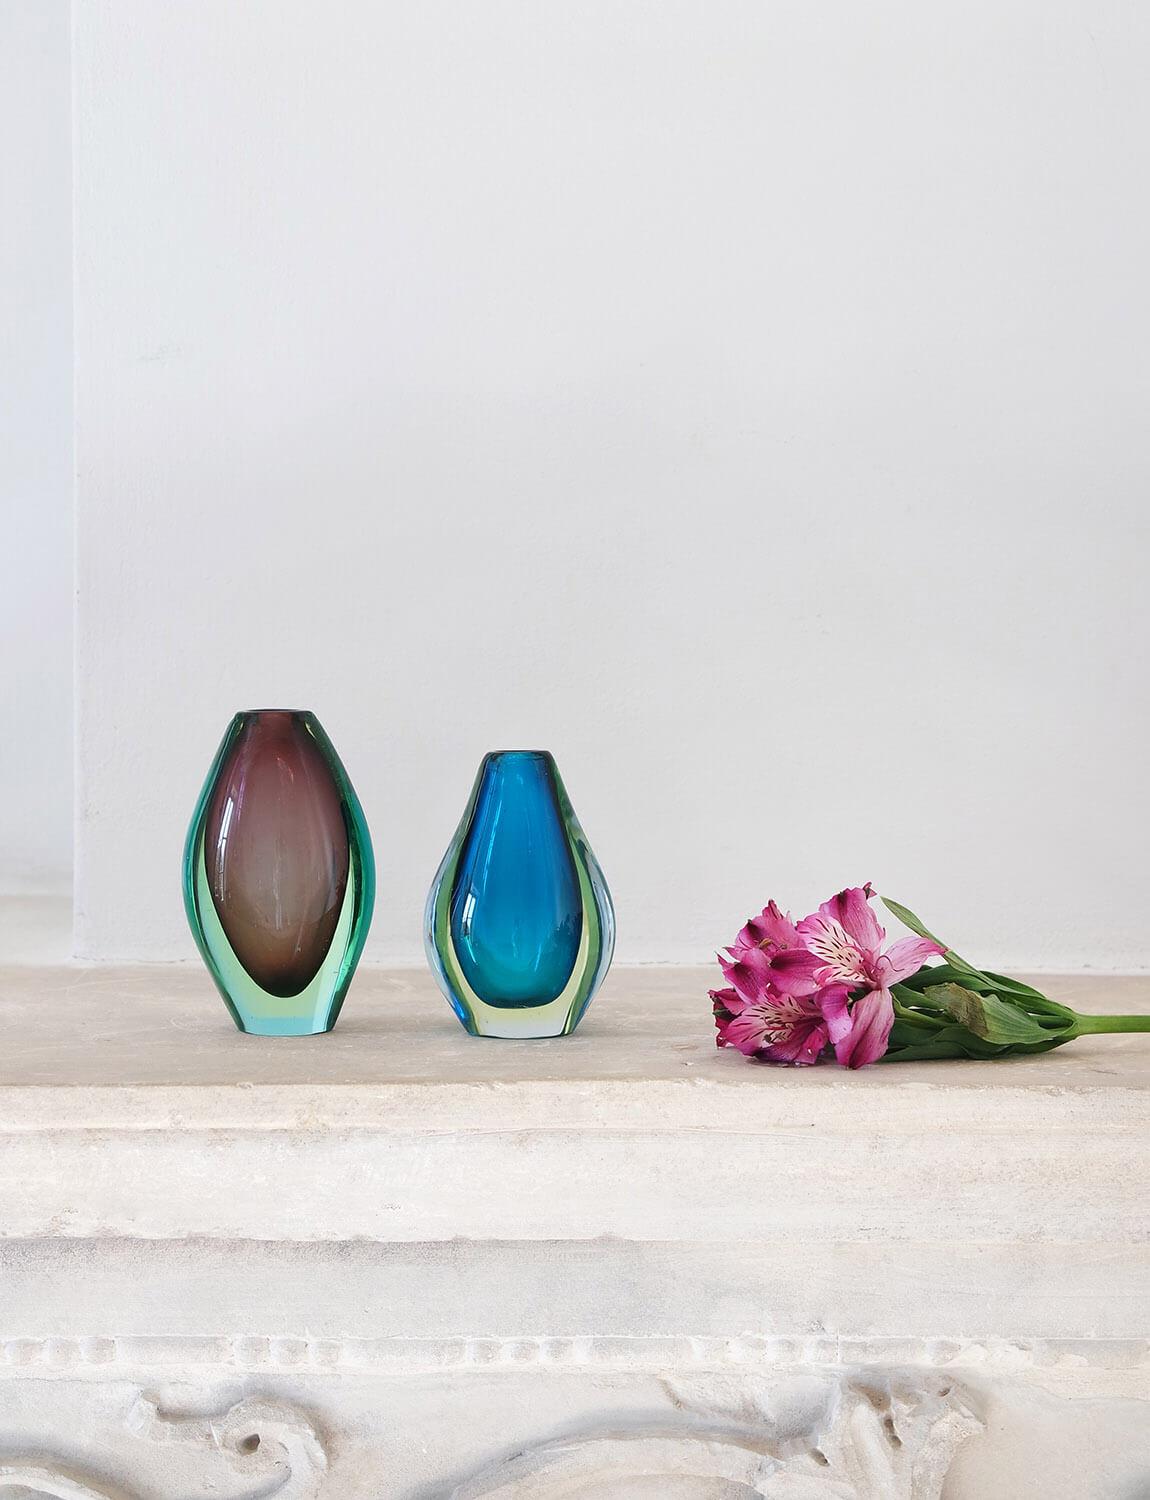 A delightful pair 1960s miniature sommerso (submerged glass) vases found here in Italy and designed by Flavio Poli. One vase has a brown glass core which has been submerged in a pale green glass, the other vase, a deep sea blue core submerged in